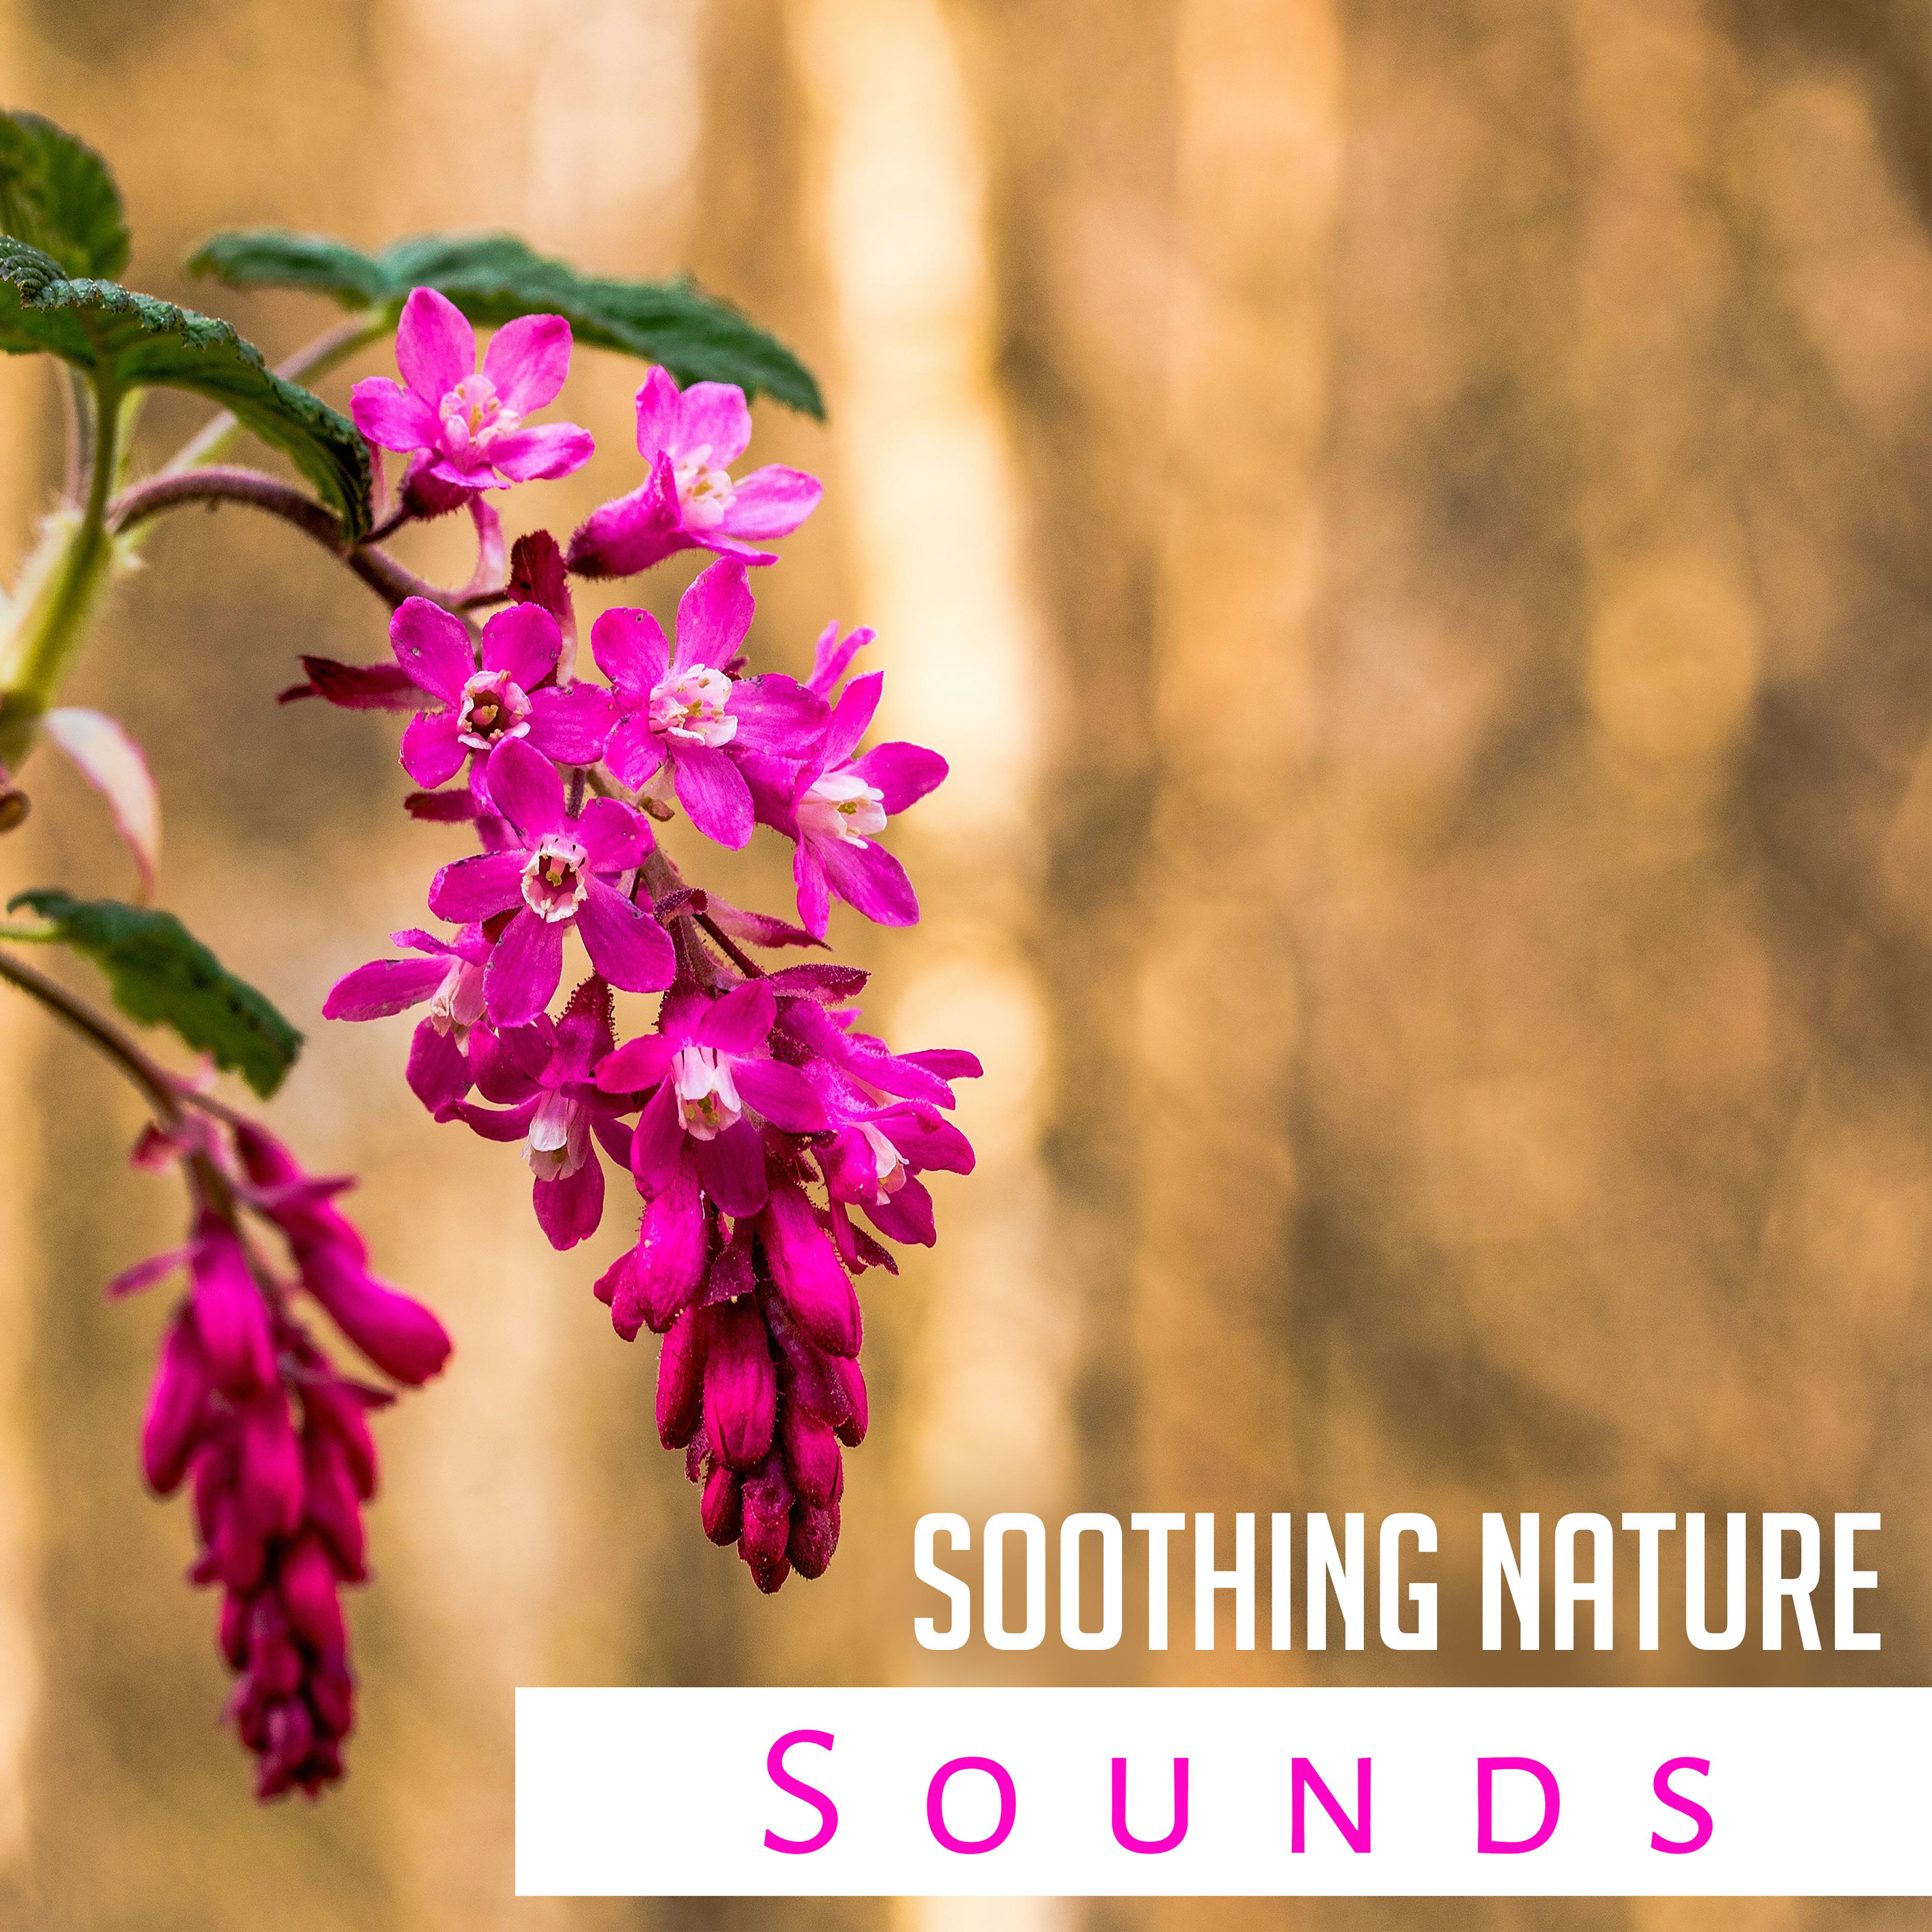 Soothing Nature Sounds – Soft Rain, Deep Relief, Serenity Music for Relaxation, Sounds of Water, Delicate Guitar, Zen